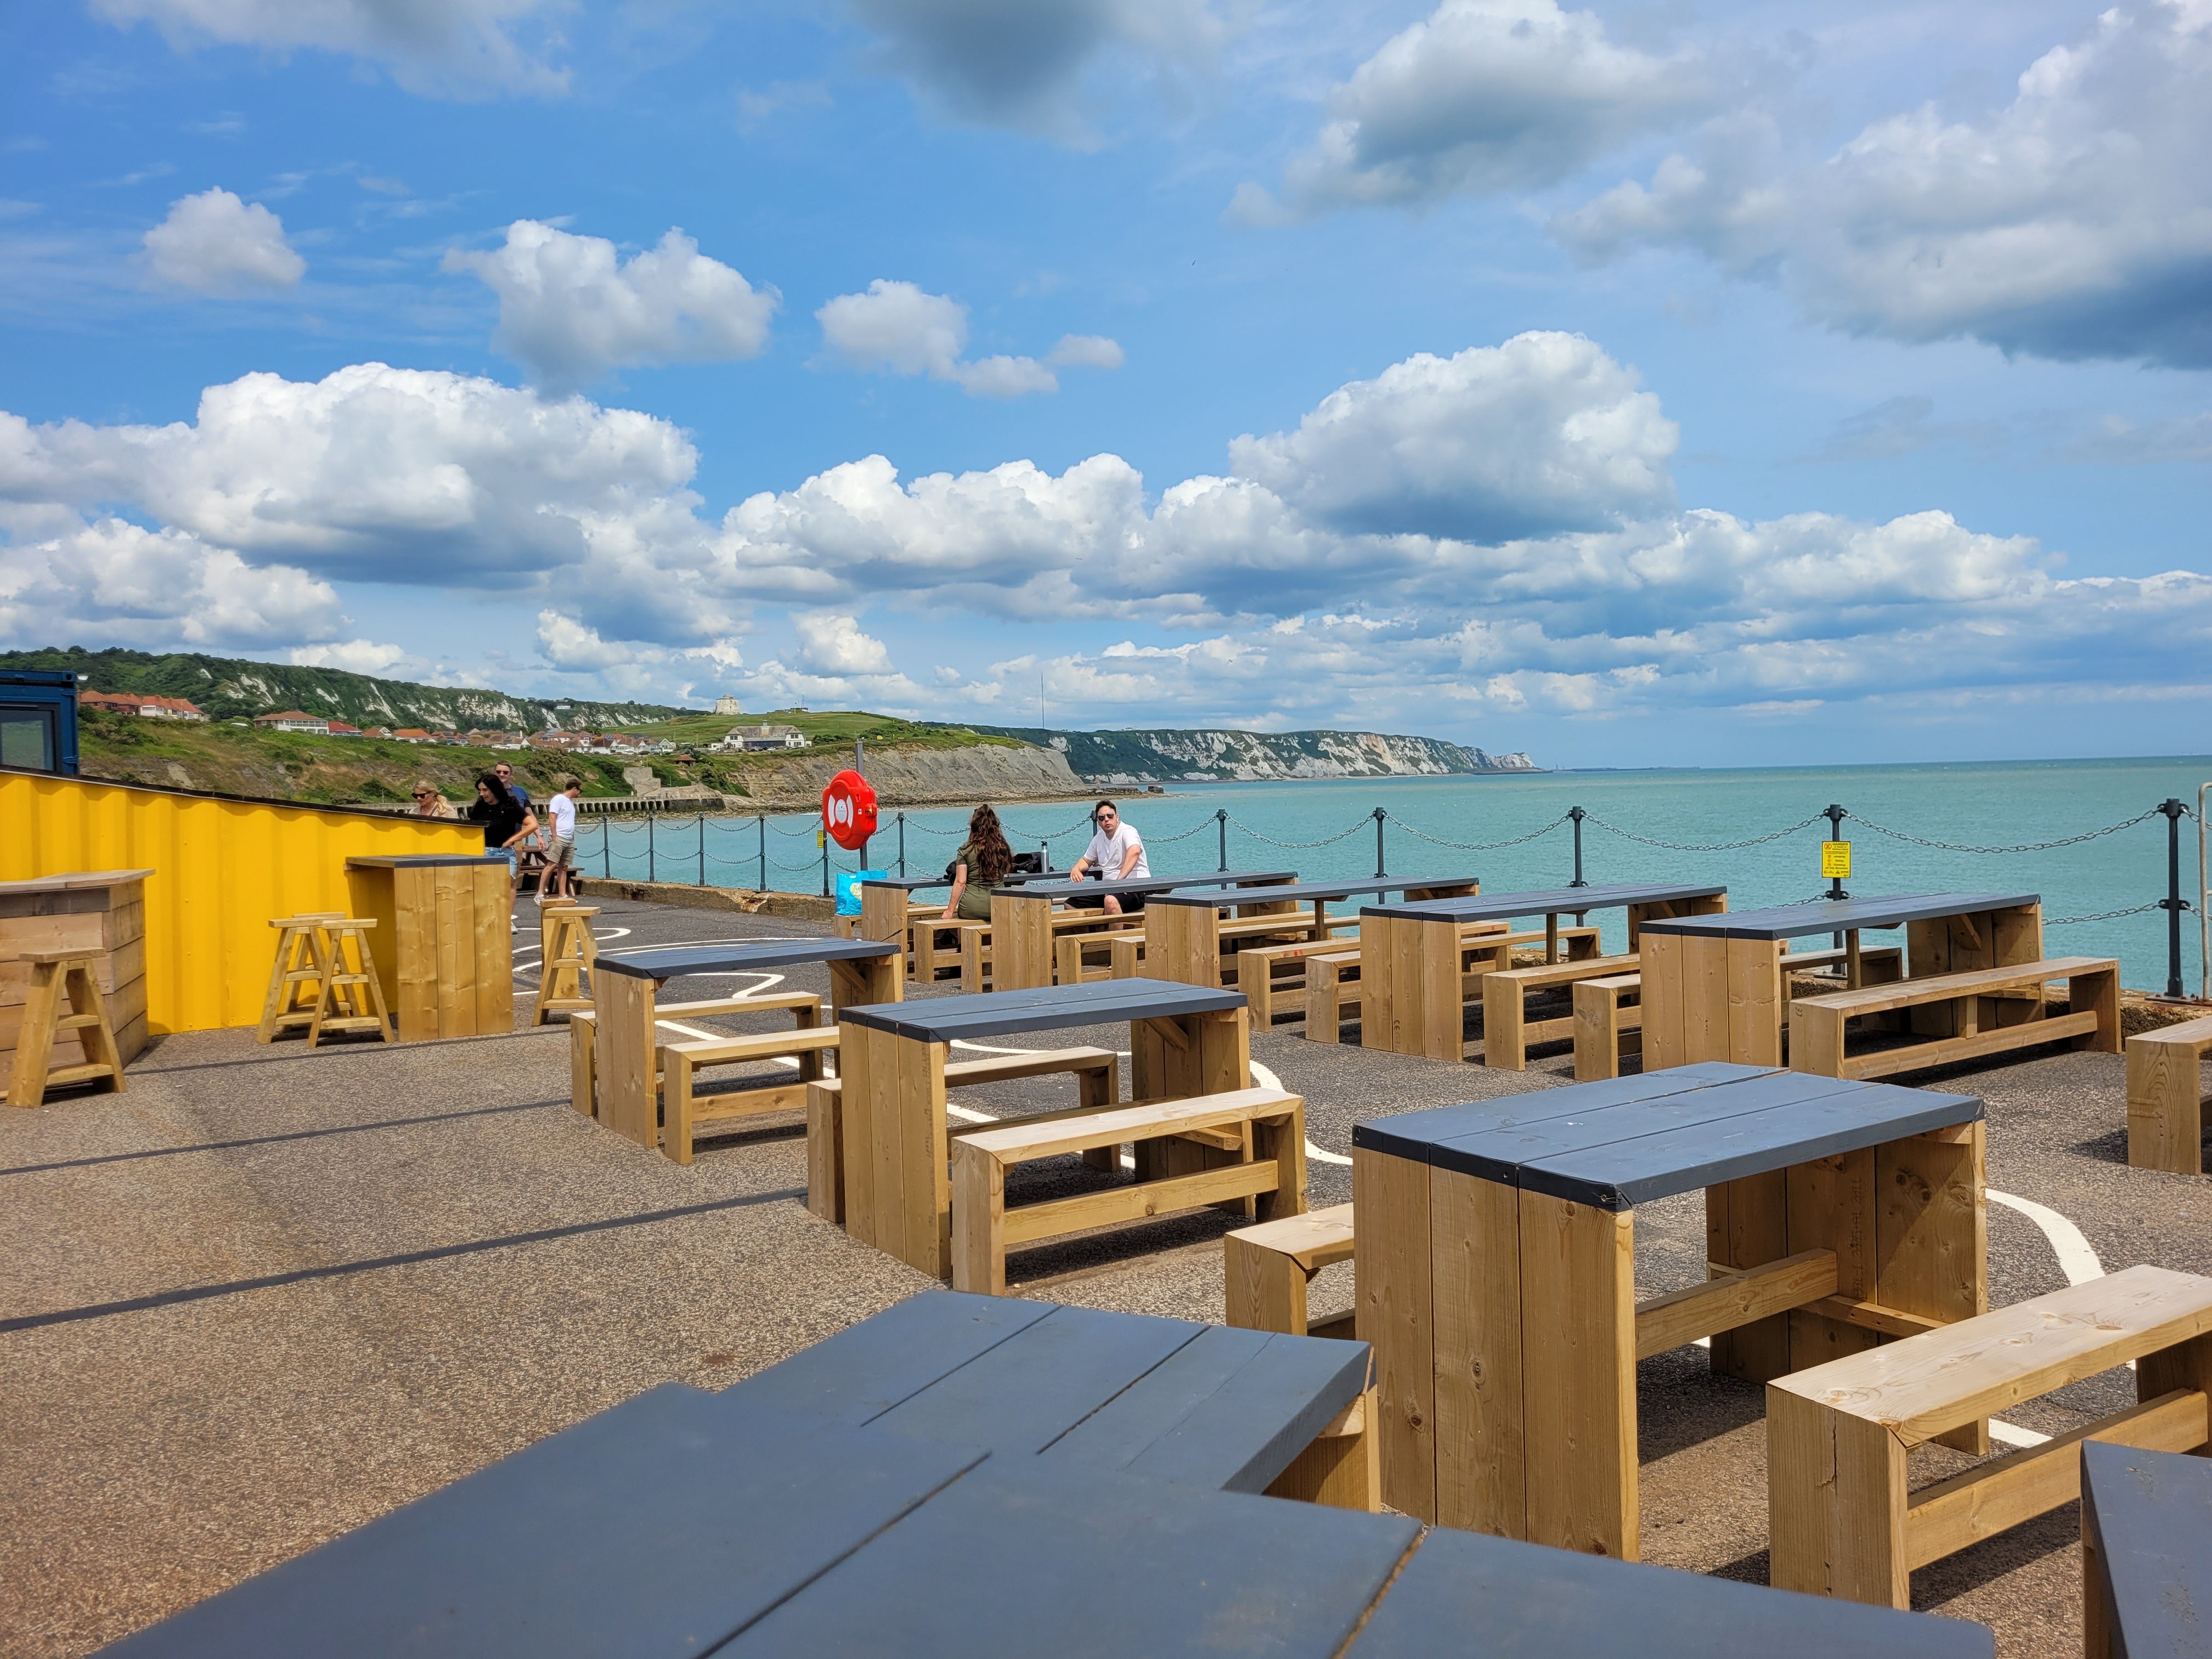 Folkestone’s redeveloped Harbour Arm has plenty of places to eat and drink